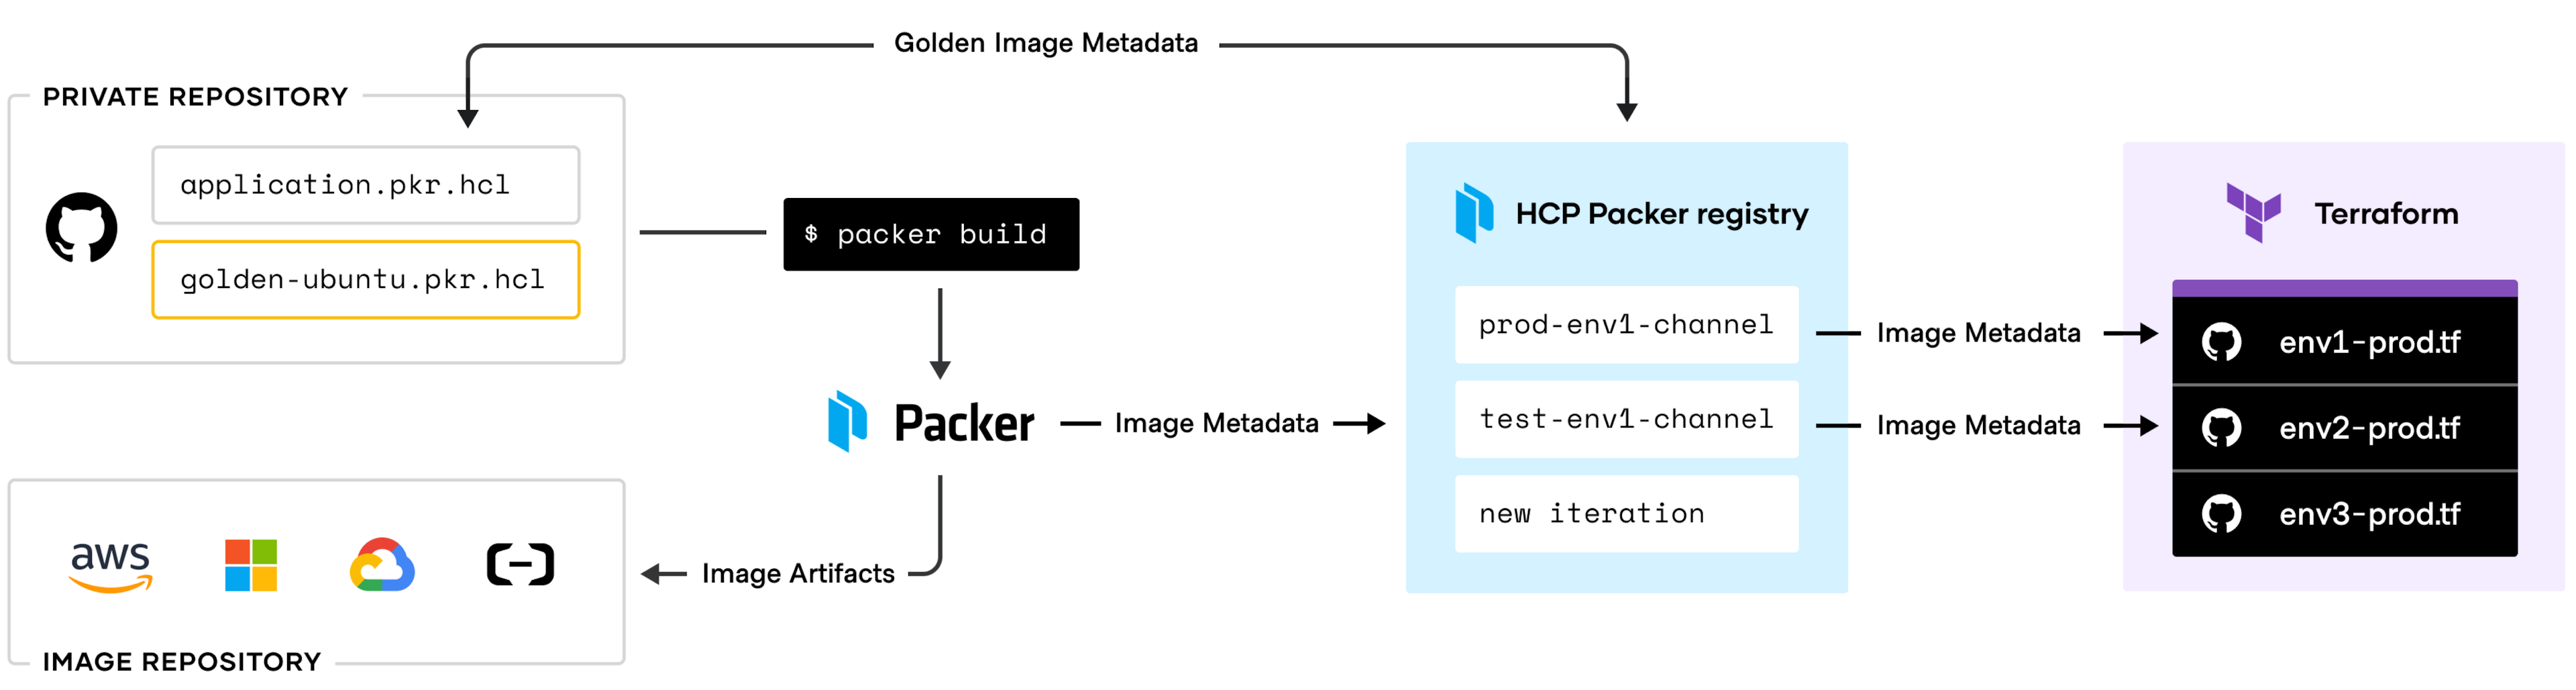 Overview of HCP Packer metadata publishing and consumption